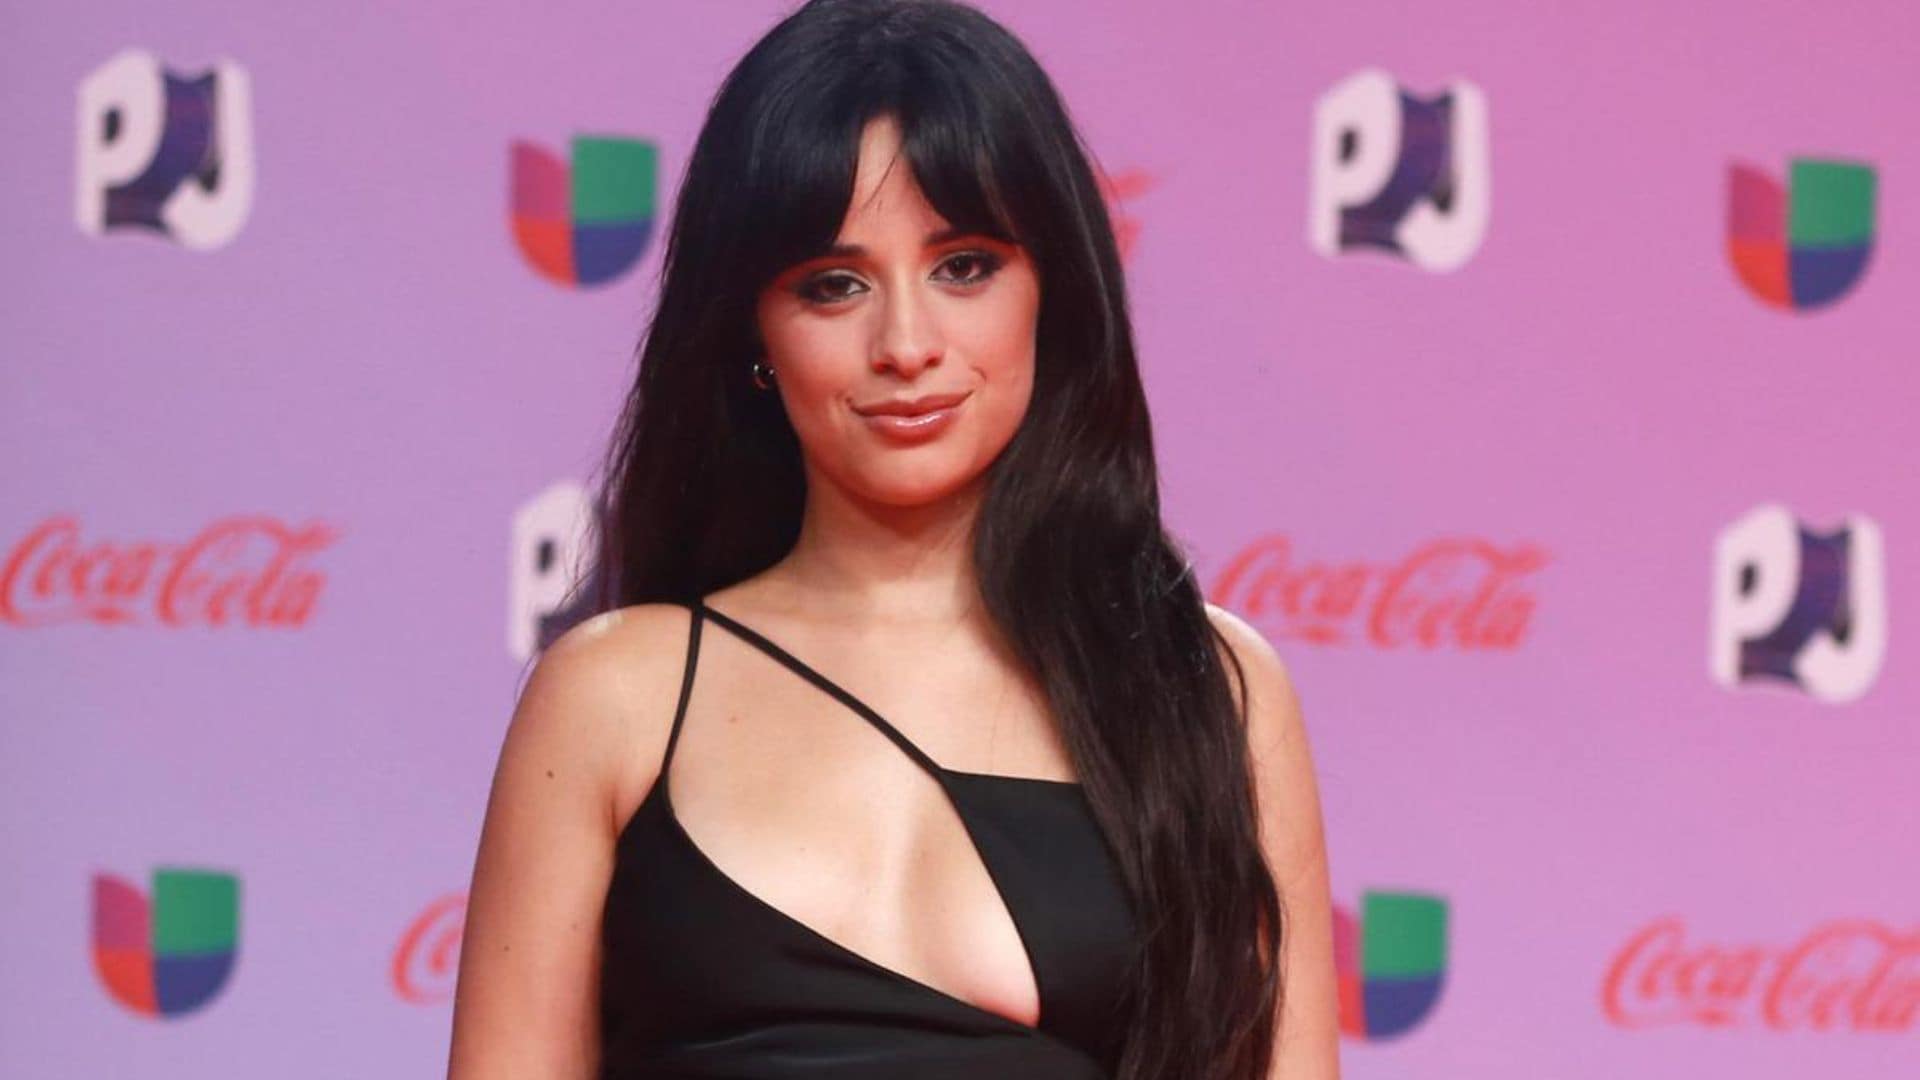 PREMIOS JUVENTUD 2023: LIVE UPDATES OF THE AWARD SHOWS 20TH ANNIVERSARY